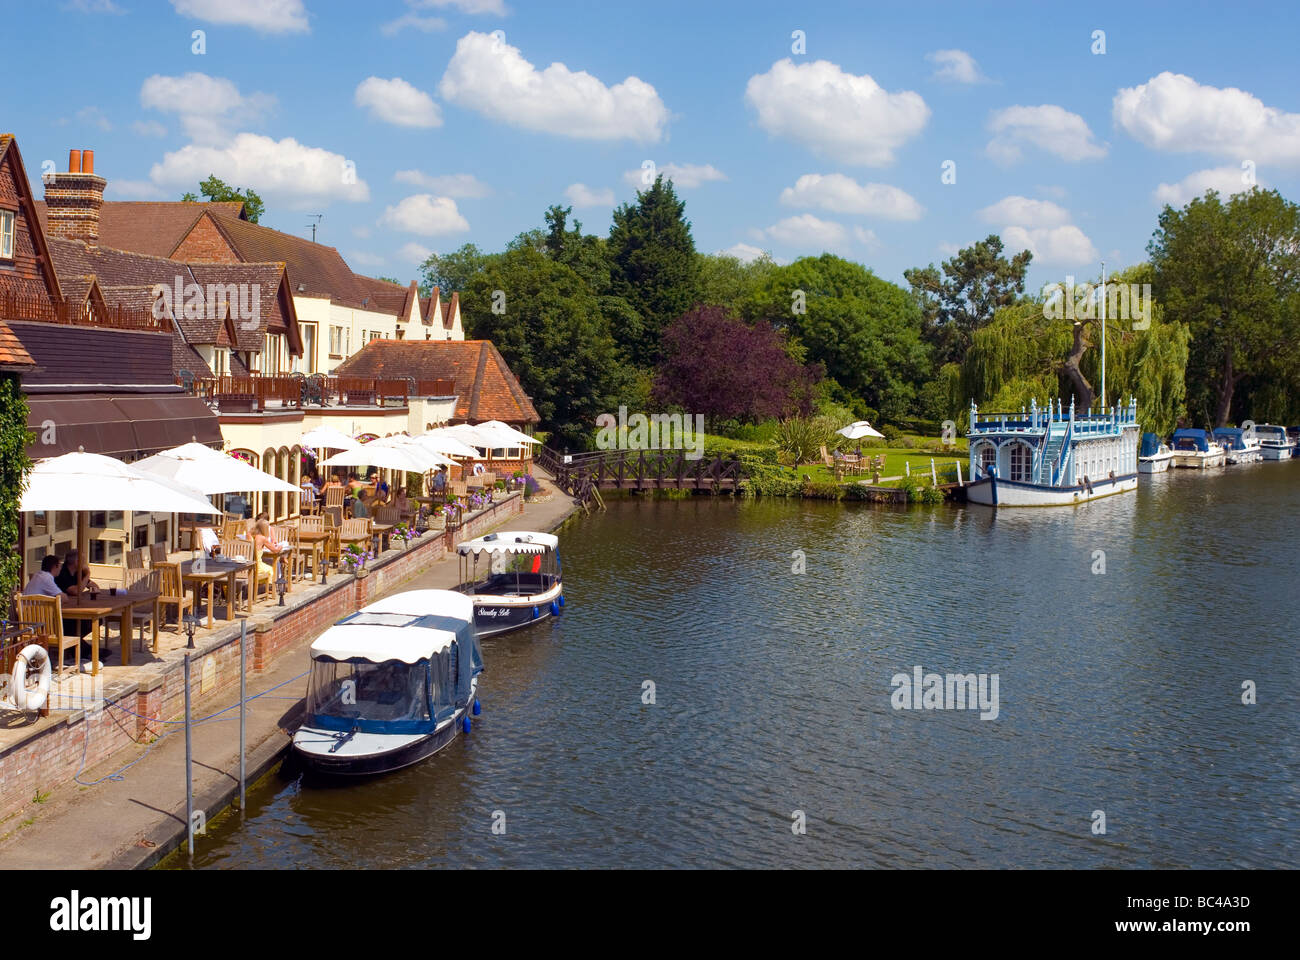 The Swan Hotel and River Thames at Streatley, Berkshire, England Stock Photo